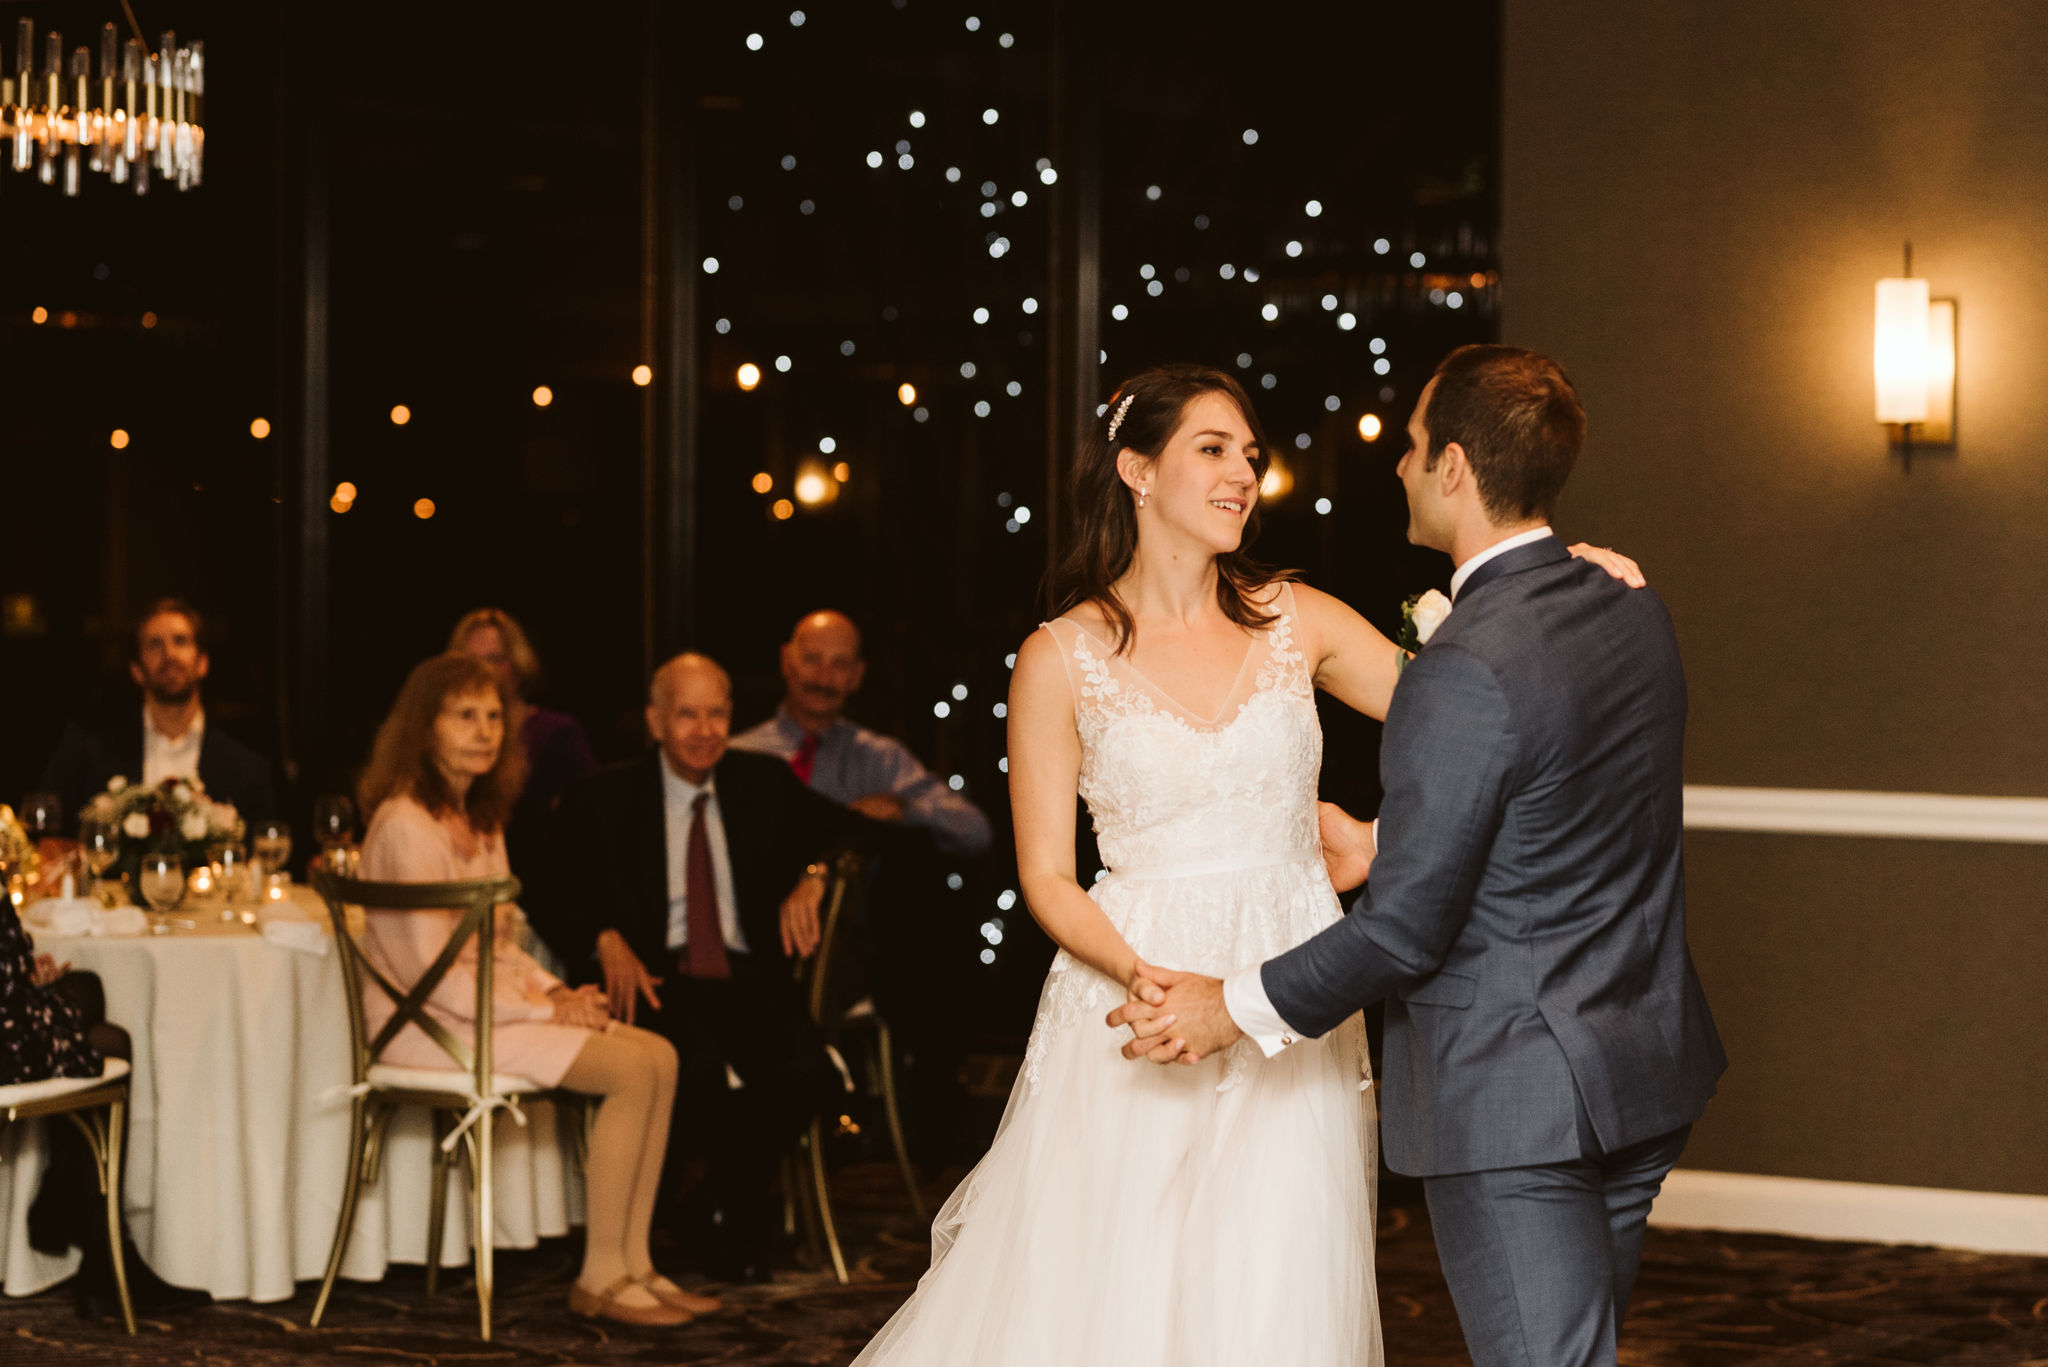  Phoenix Maryland, Baltimore Wedding Photographer, Eagle’s Nest Country Club, Classic, Romantic, Bride and Groom Sharing First Dance Among Twinkle Lights 